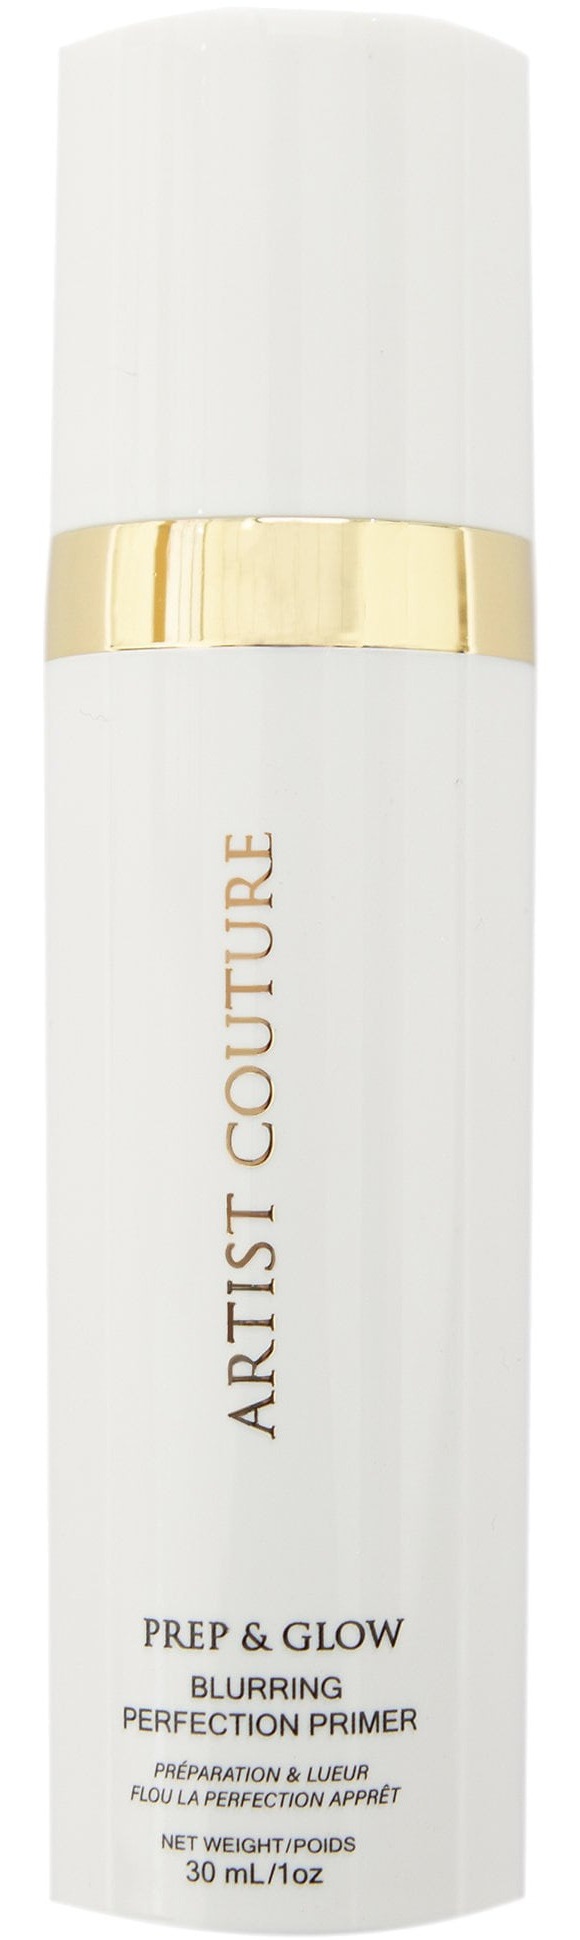 ARTIST COUTURE Prep & Glow Blurring Perfection Primer